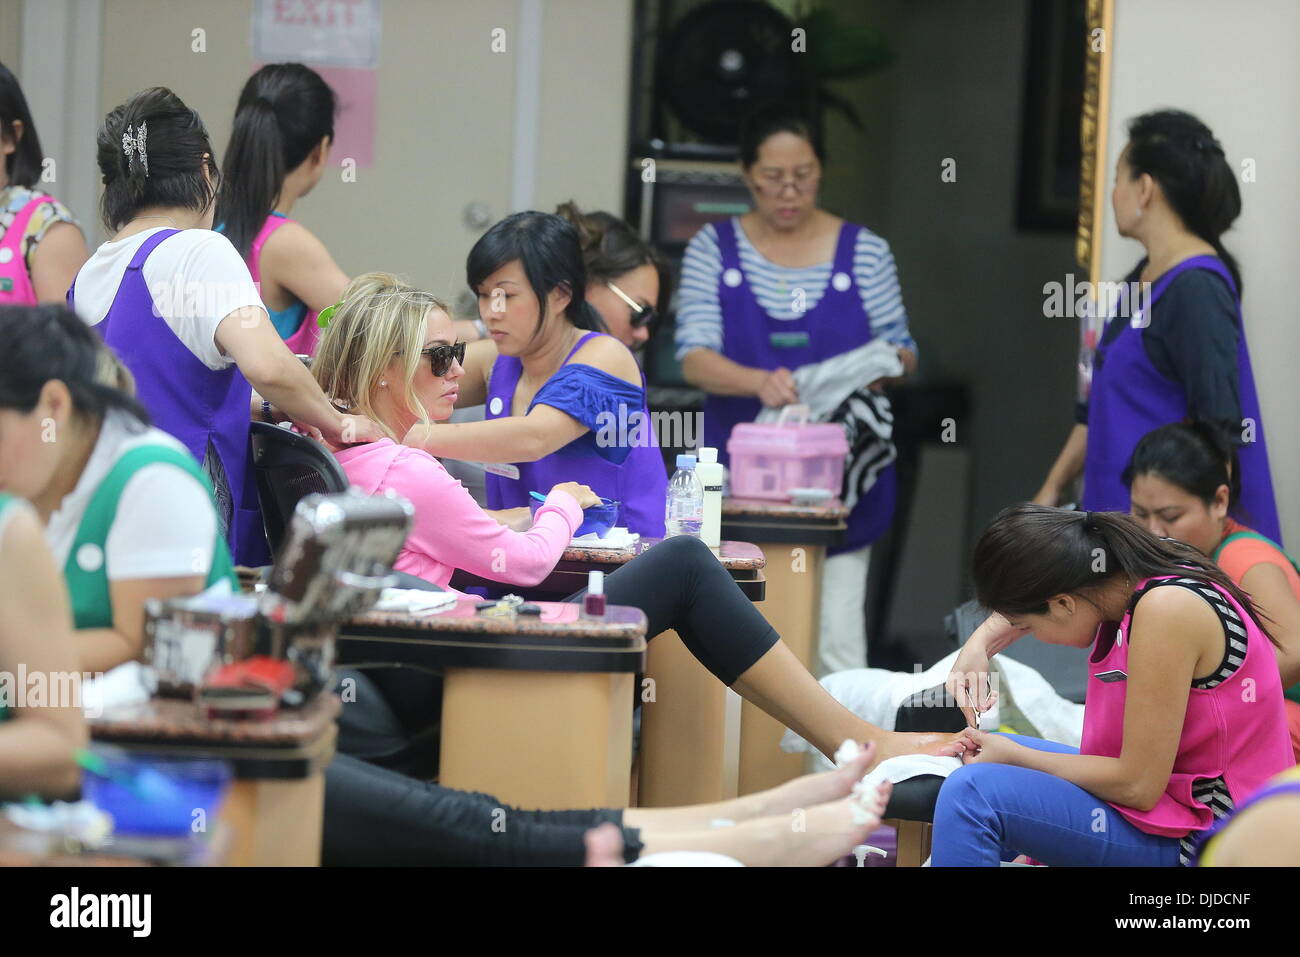 Beverly Hills Pedicure Prices - wide 2